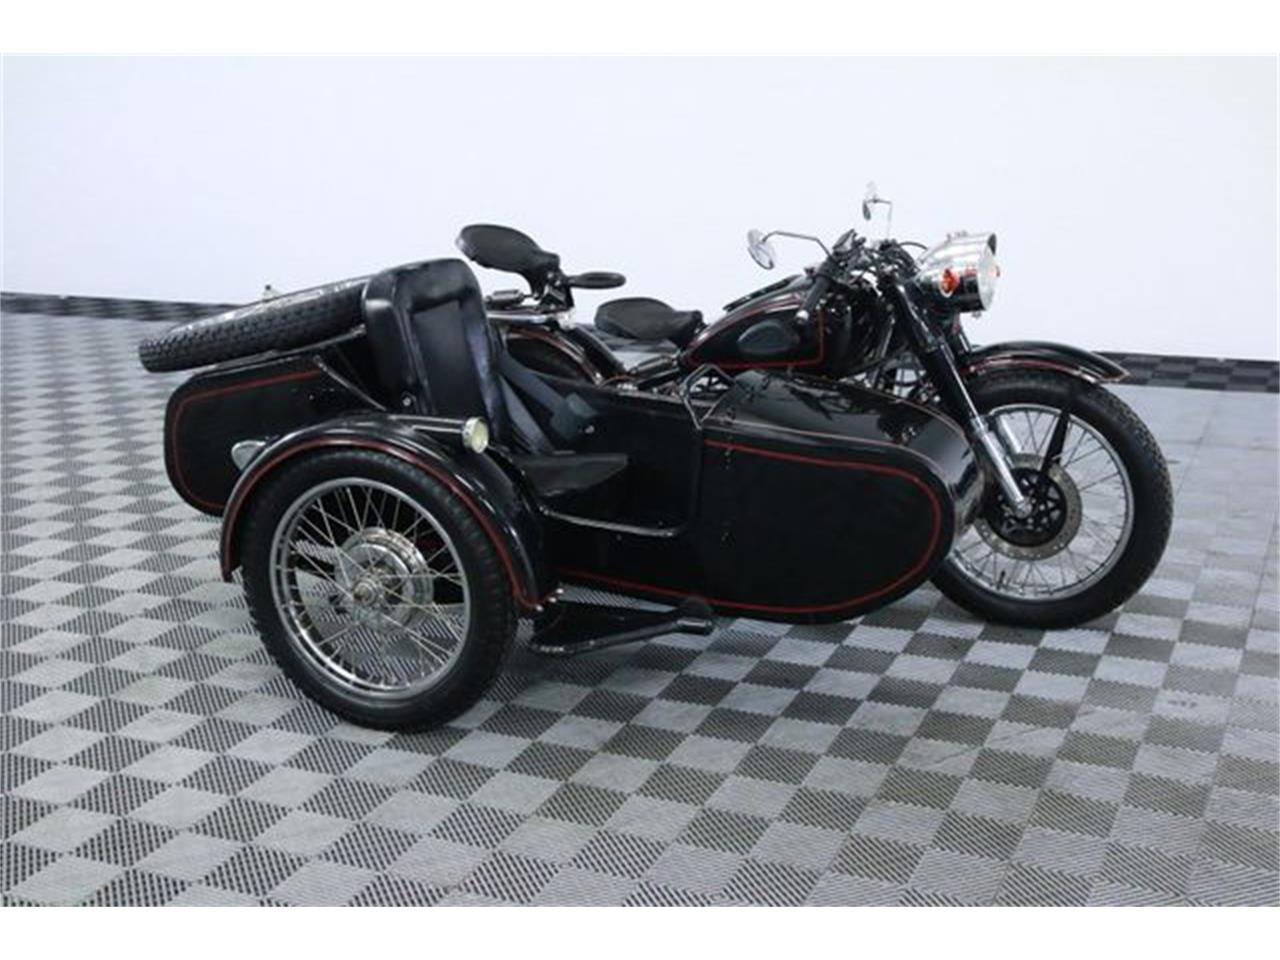 1973 BMW Motorcycle for Sale | ClassicCars.com | CC-1022400